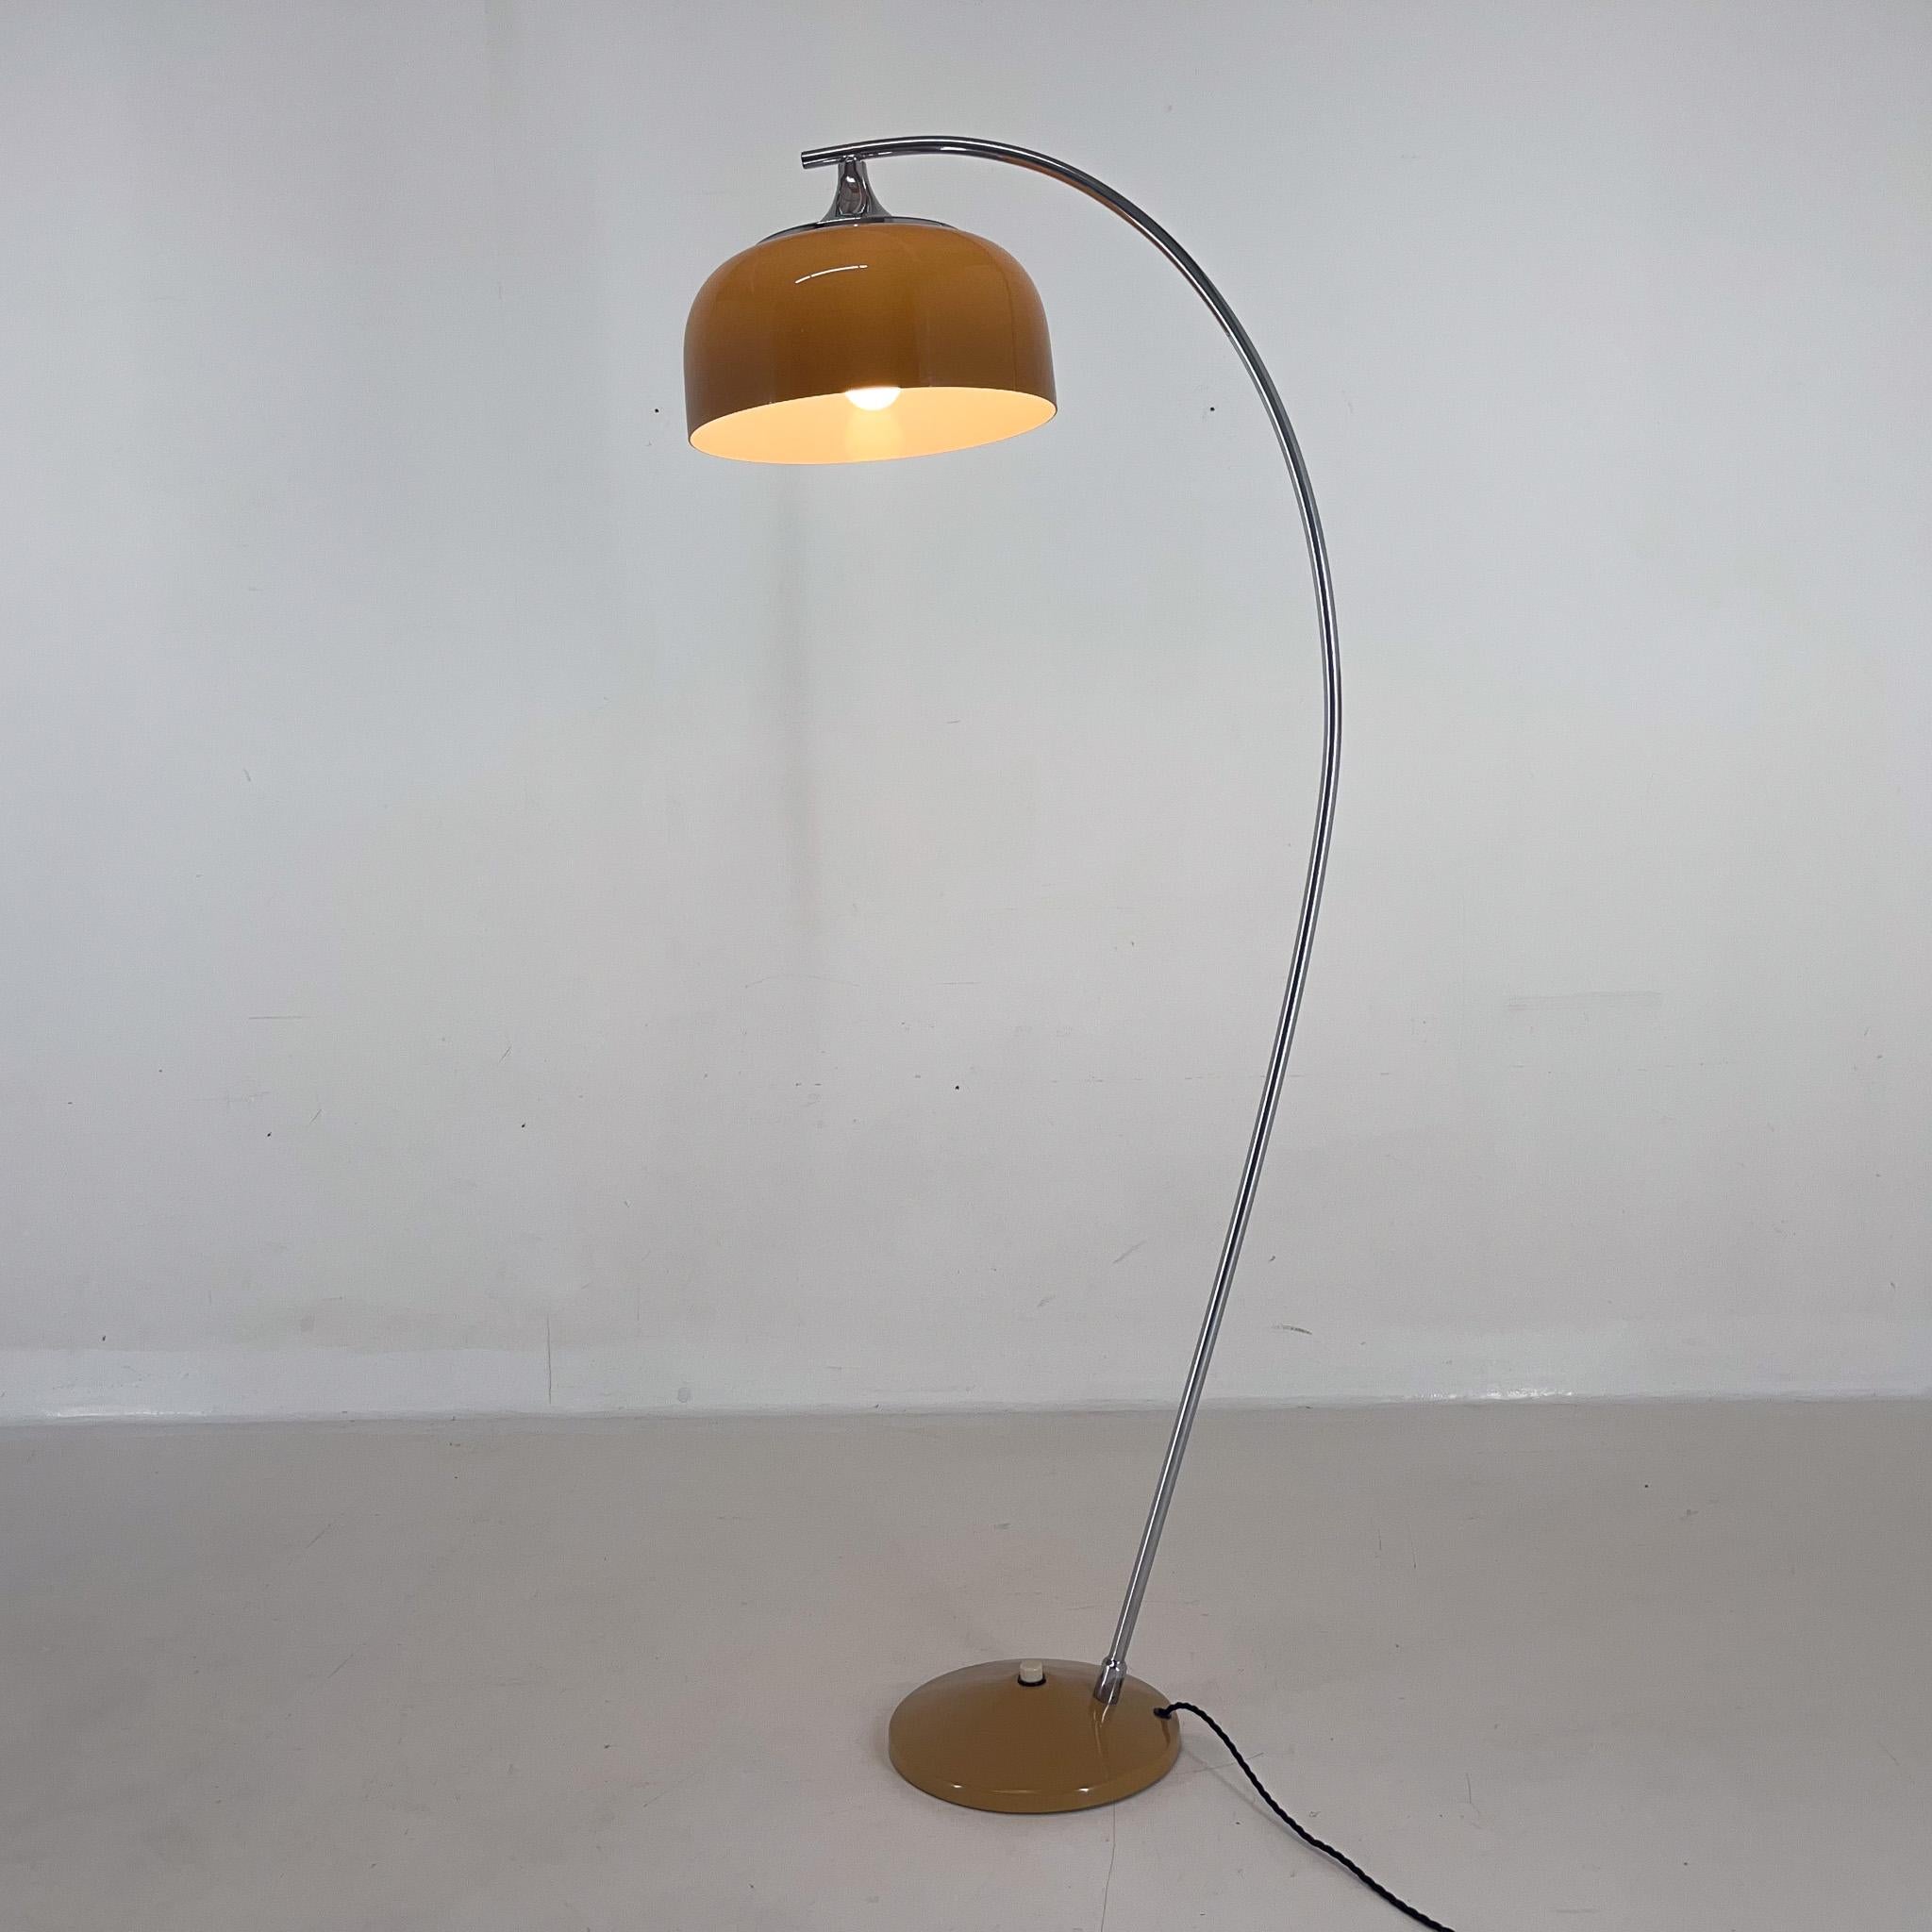 Vintage arch floor lamp produced in formeer Czechoslovakia in the 1960's. Made of chrome, metal and plastic. The lamp has been restored. 
Bulb: 1 x E26-E27. 
US plug adapter included.